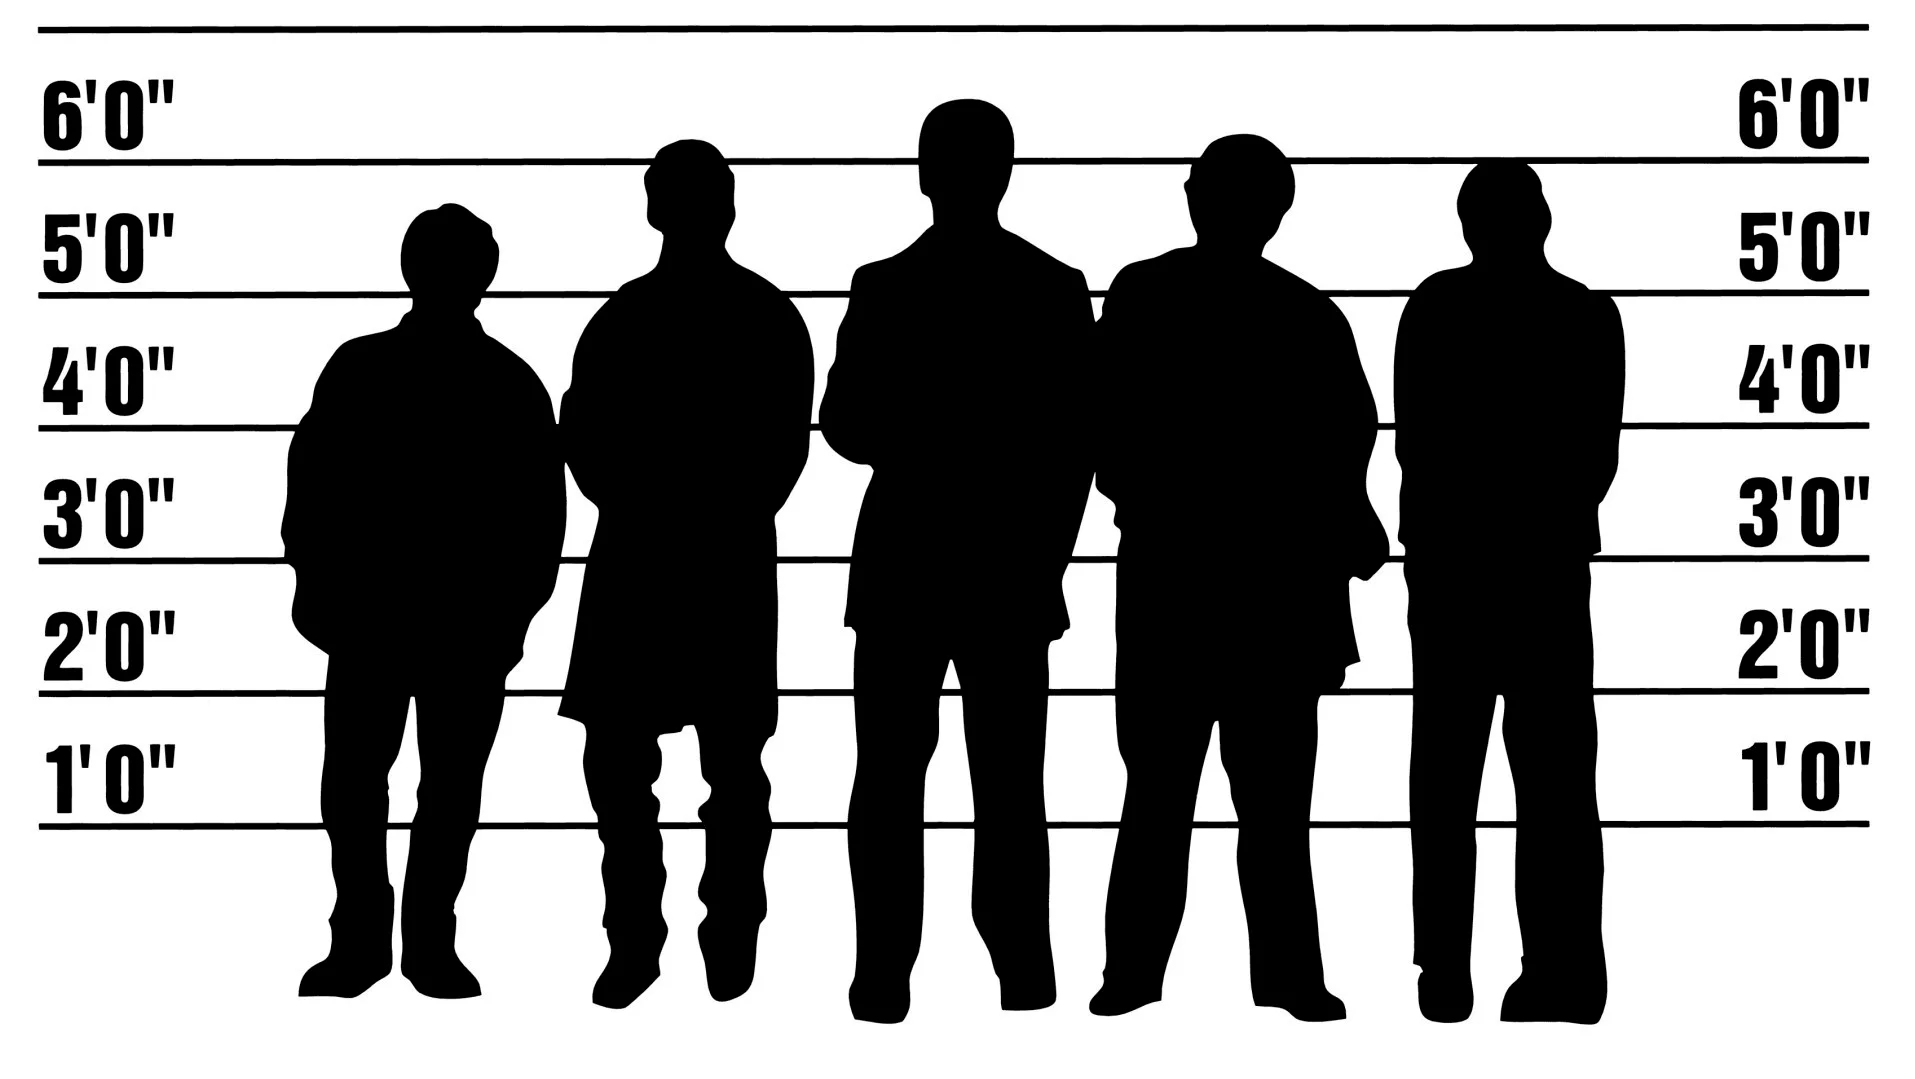 Photo du film : Usual suspects